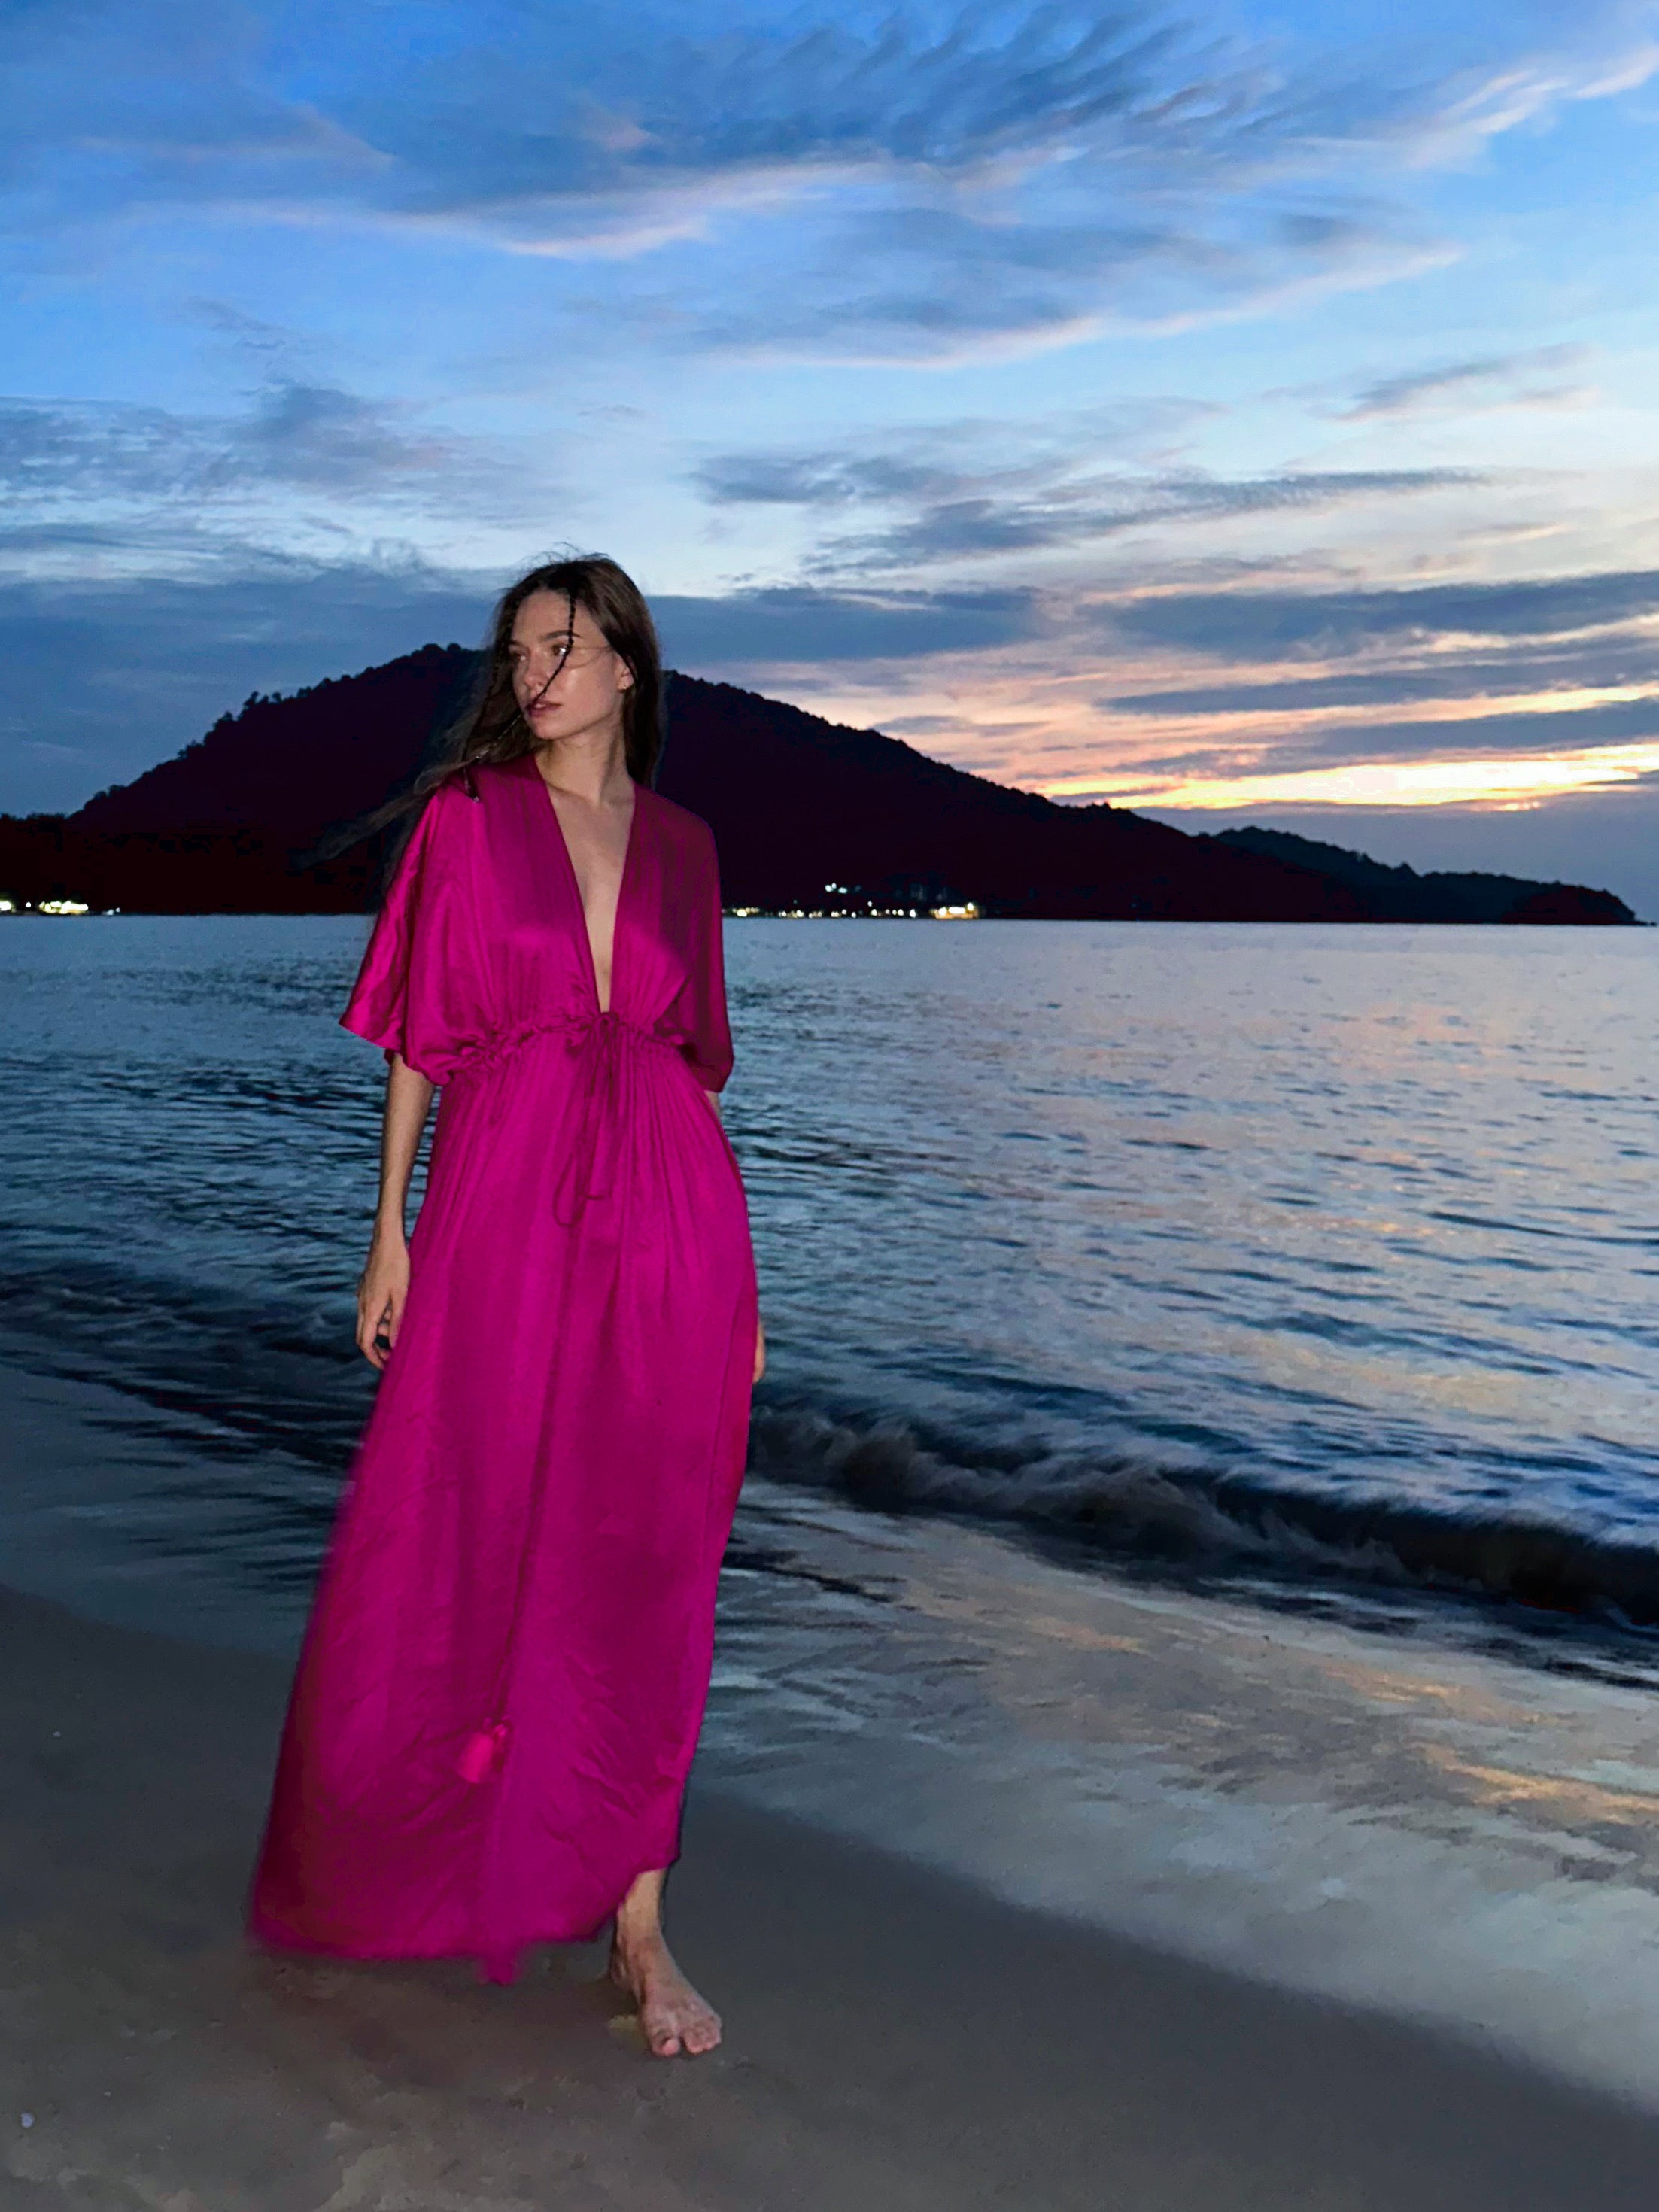 Shop Pink Kaftan Dress in limitless comfort and elegance with our Goddess Kaftan Maxi Dress Dyed fuchsia kaftan maxi dress. This fuchsia caftan maxi dress is the perfect vacation wear with Coco de Chom?